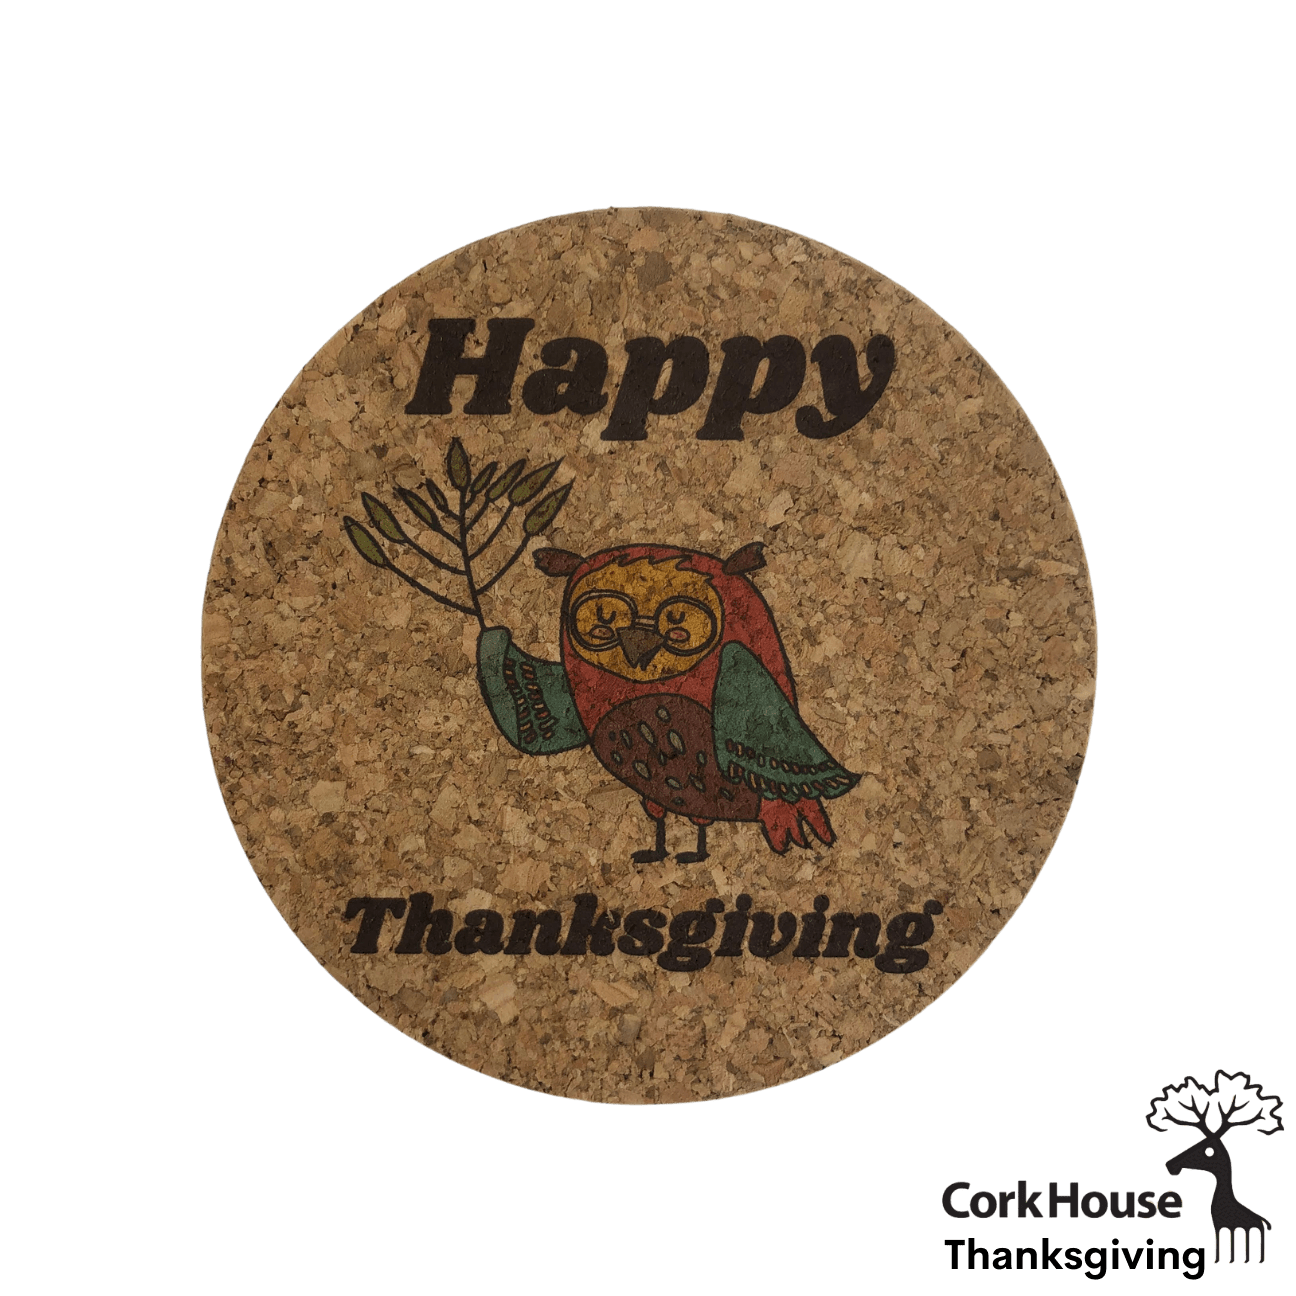 Printed cork coaster featuring a bespectacled red, yellow and green owl holding a tree branch with the words "Happy Thanksgivings"